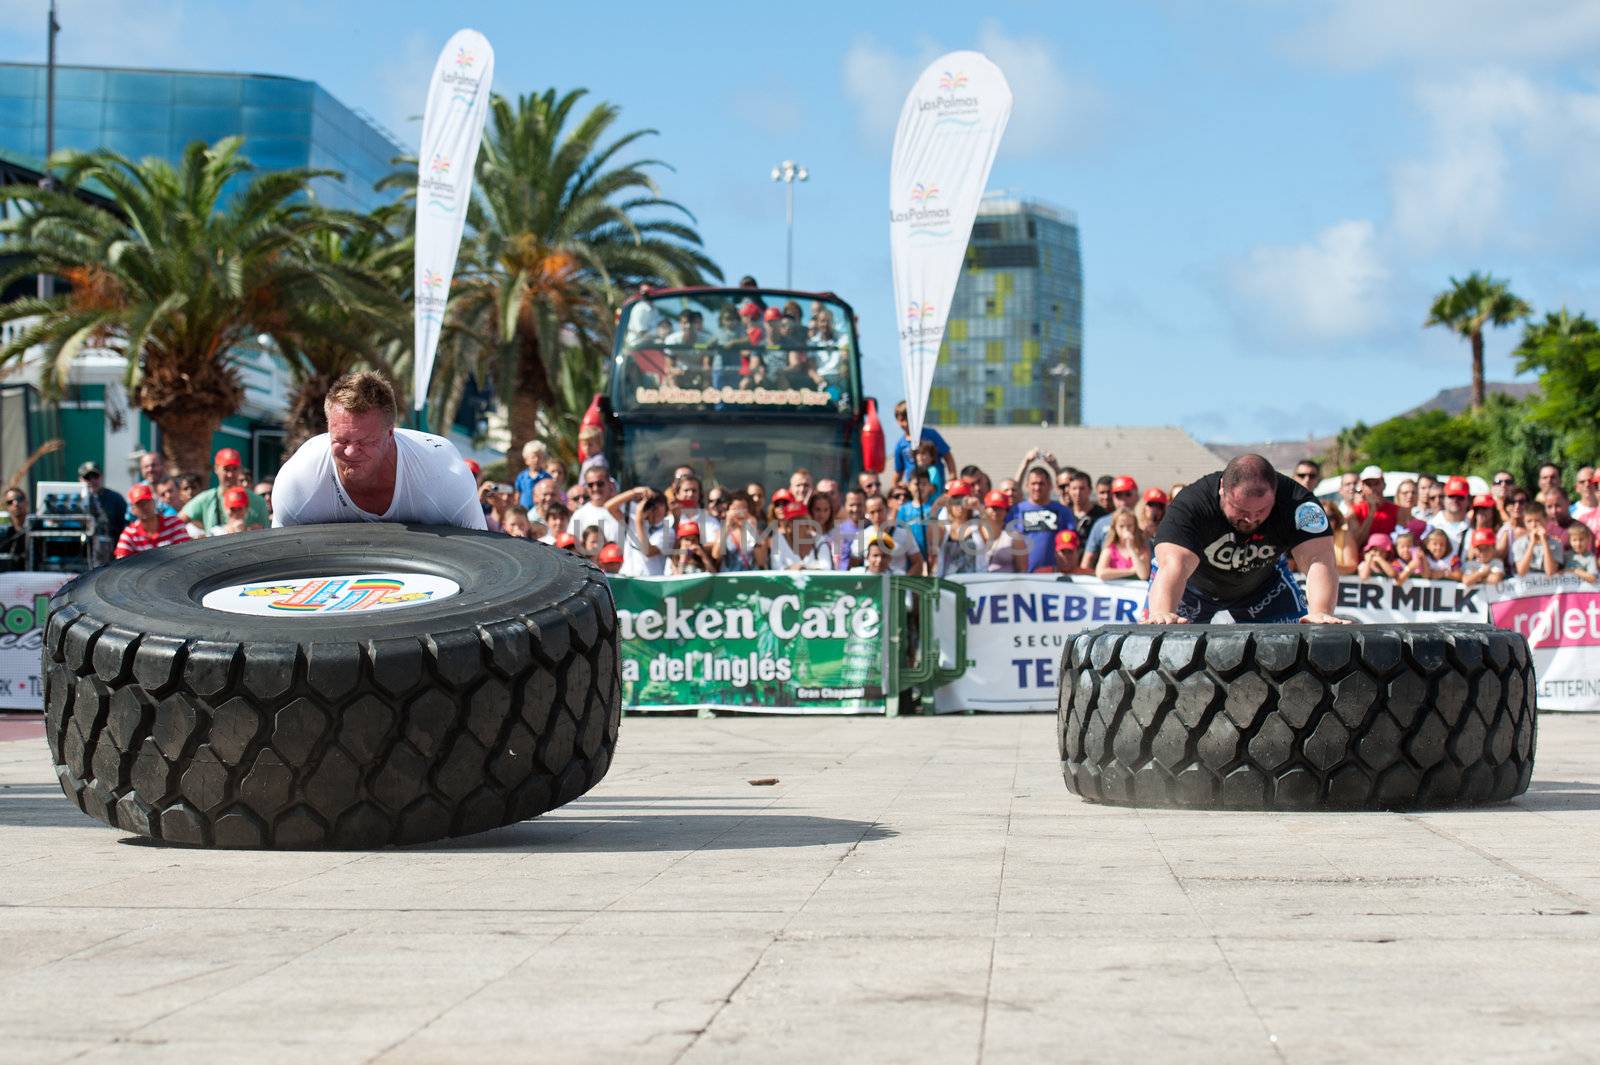 CANARY ISLANDS - SEPTEMBER 3: Tomi Lotta (l) from Finland and Warrick Brant from Australia (r) lifting a wheel during Strongman Champions League in Las Palmas September 03, 2011 in Canary Islands, Spain